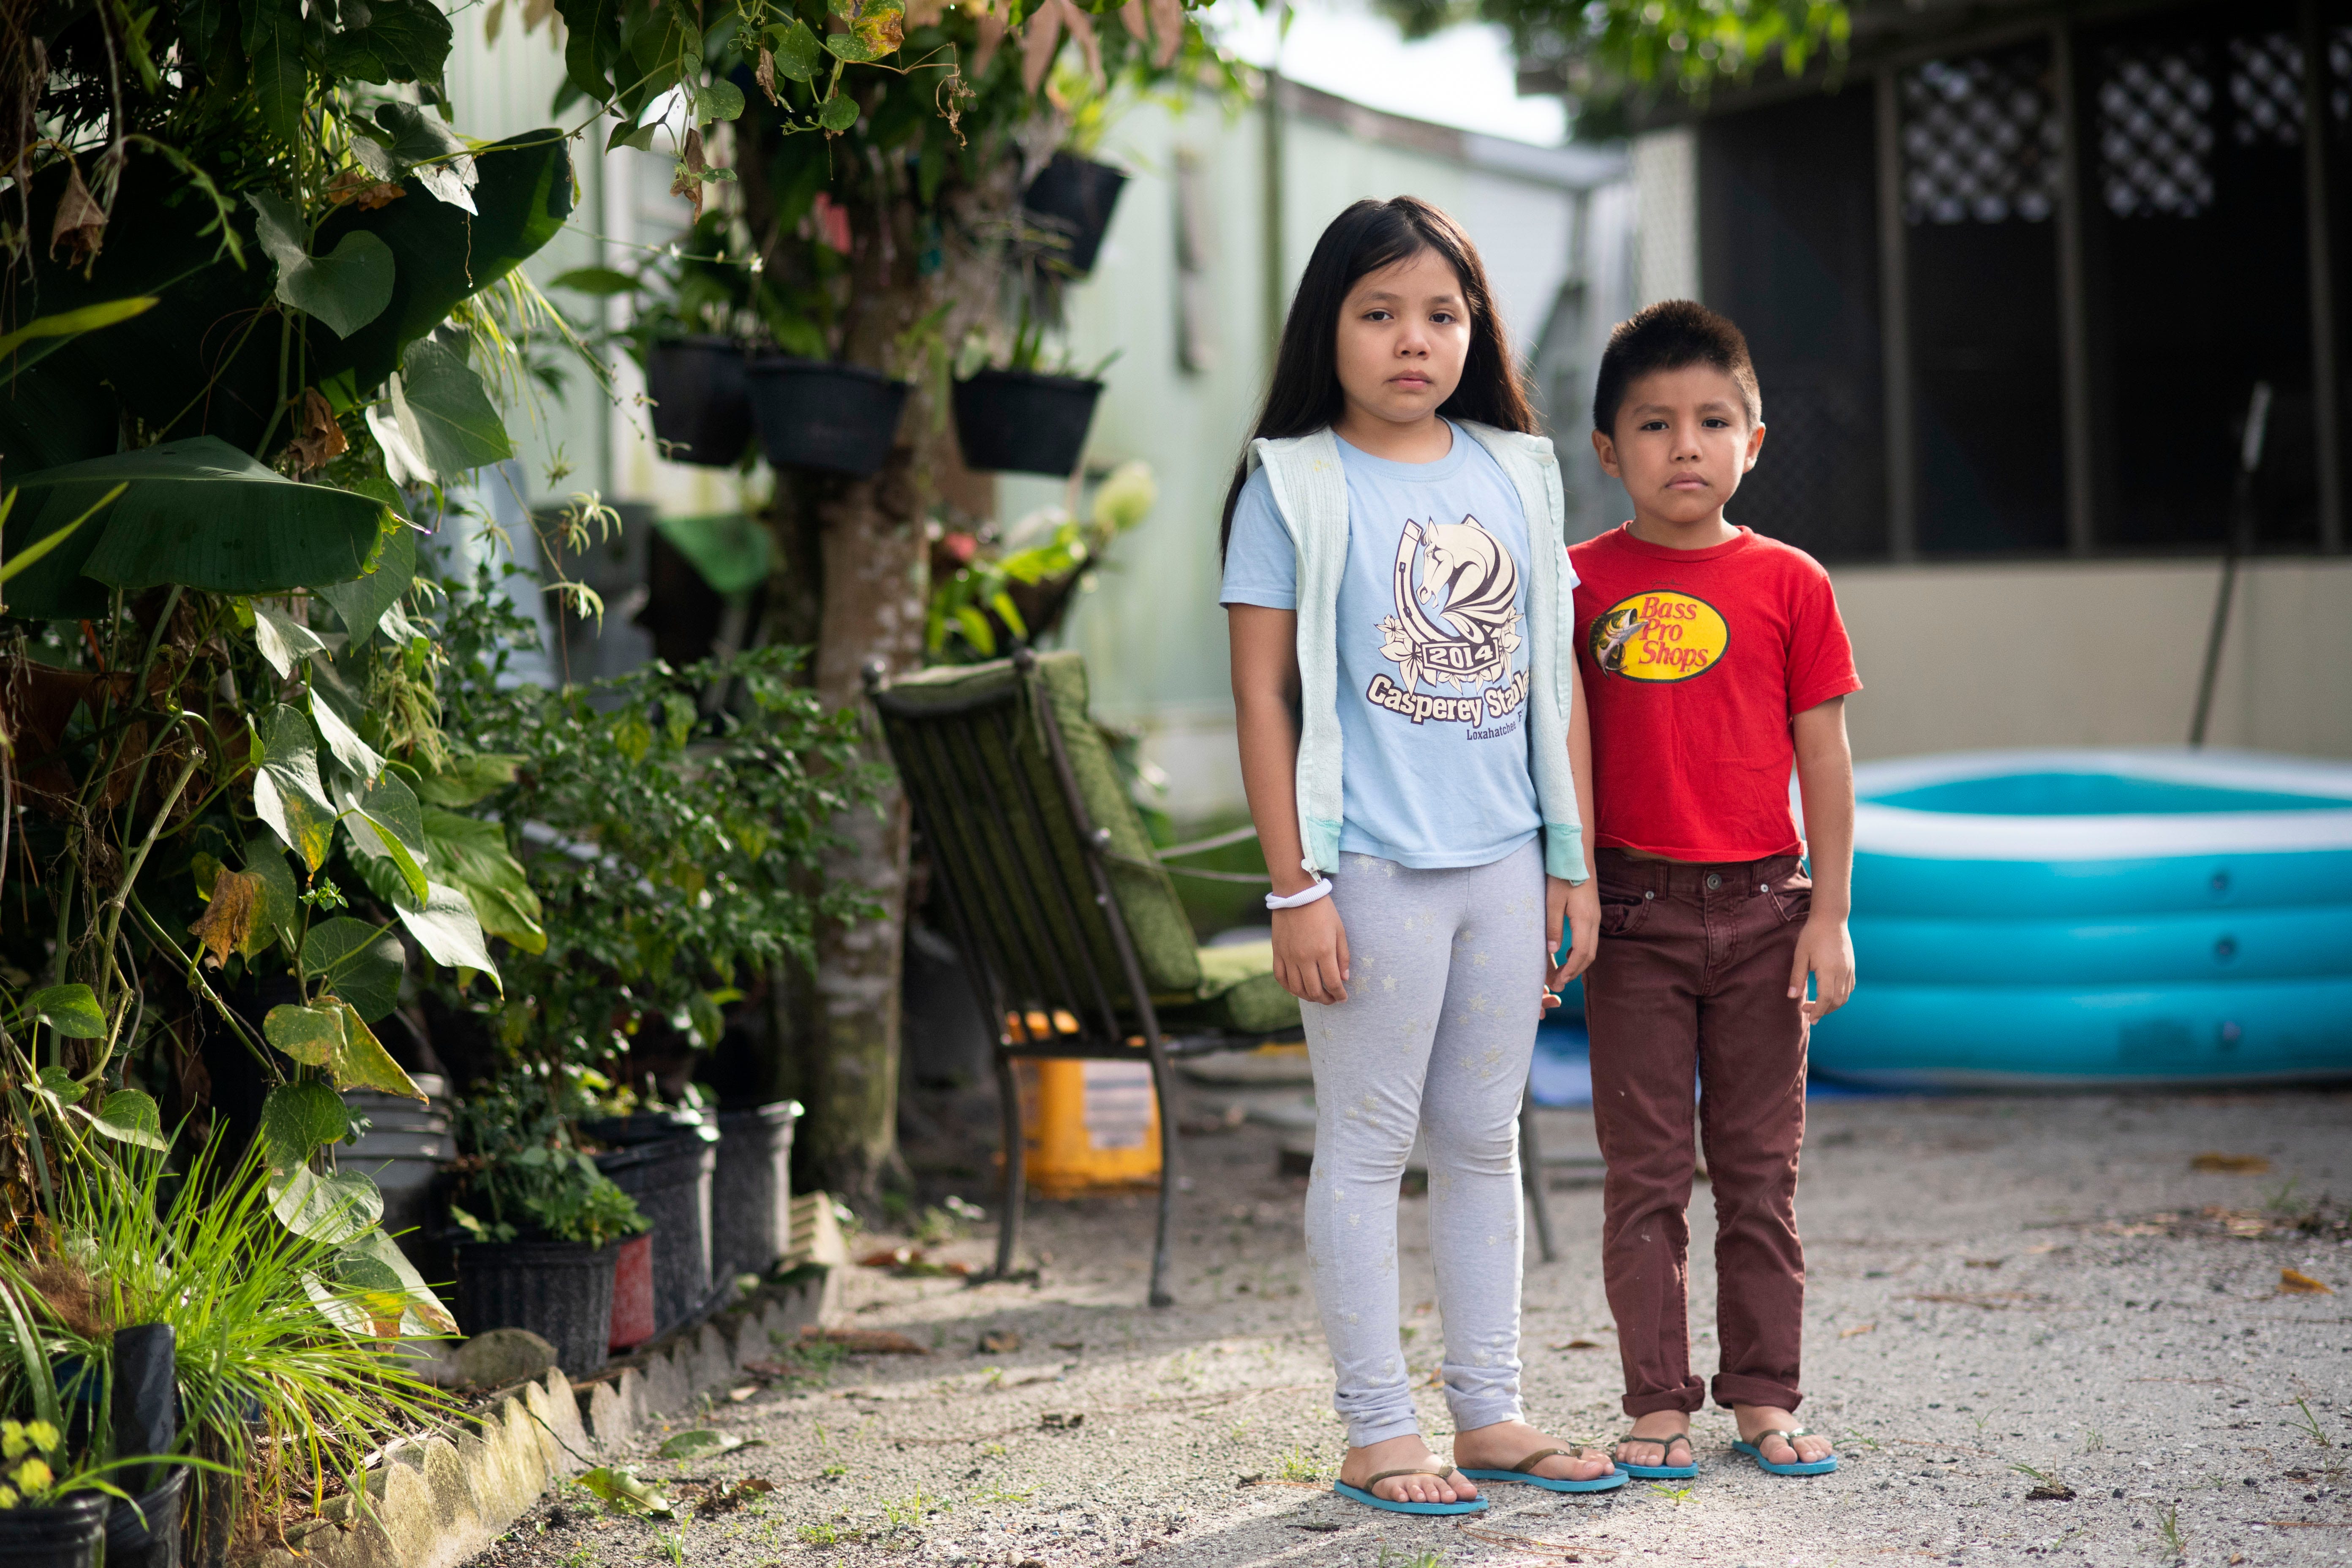 Siblings Jessica Tzul, 9, and Freddy Tzul, 7, are students at Warfield Elementary School in Indiantown, Florida. Their father, Freddy Vasquez, has decided to enroll the elementary students and his two high-school-age children through the virtual learning option and to send them back to campus only when COVID-19 cases decline. "I don't agree with reopening schools," Vasquez said. "The situation is getting worse, and sending kids back to school will make it worse."